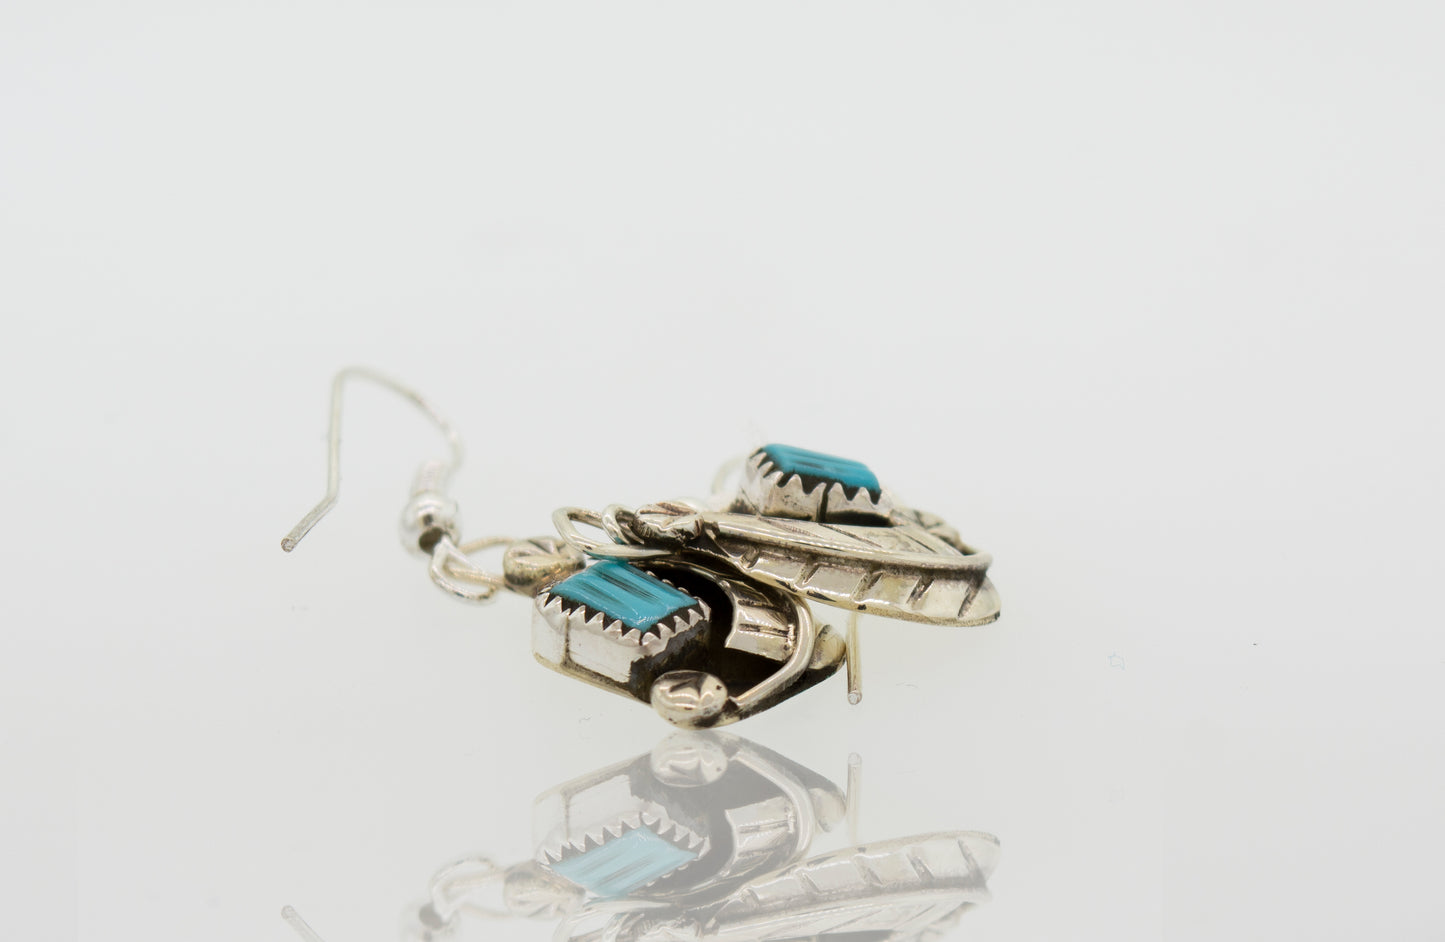 A pair of Zuni Handmade Turquoise Earrings by Super Silver with natural turquoise stones in a leaf design.